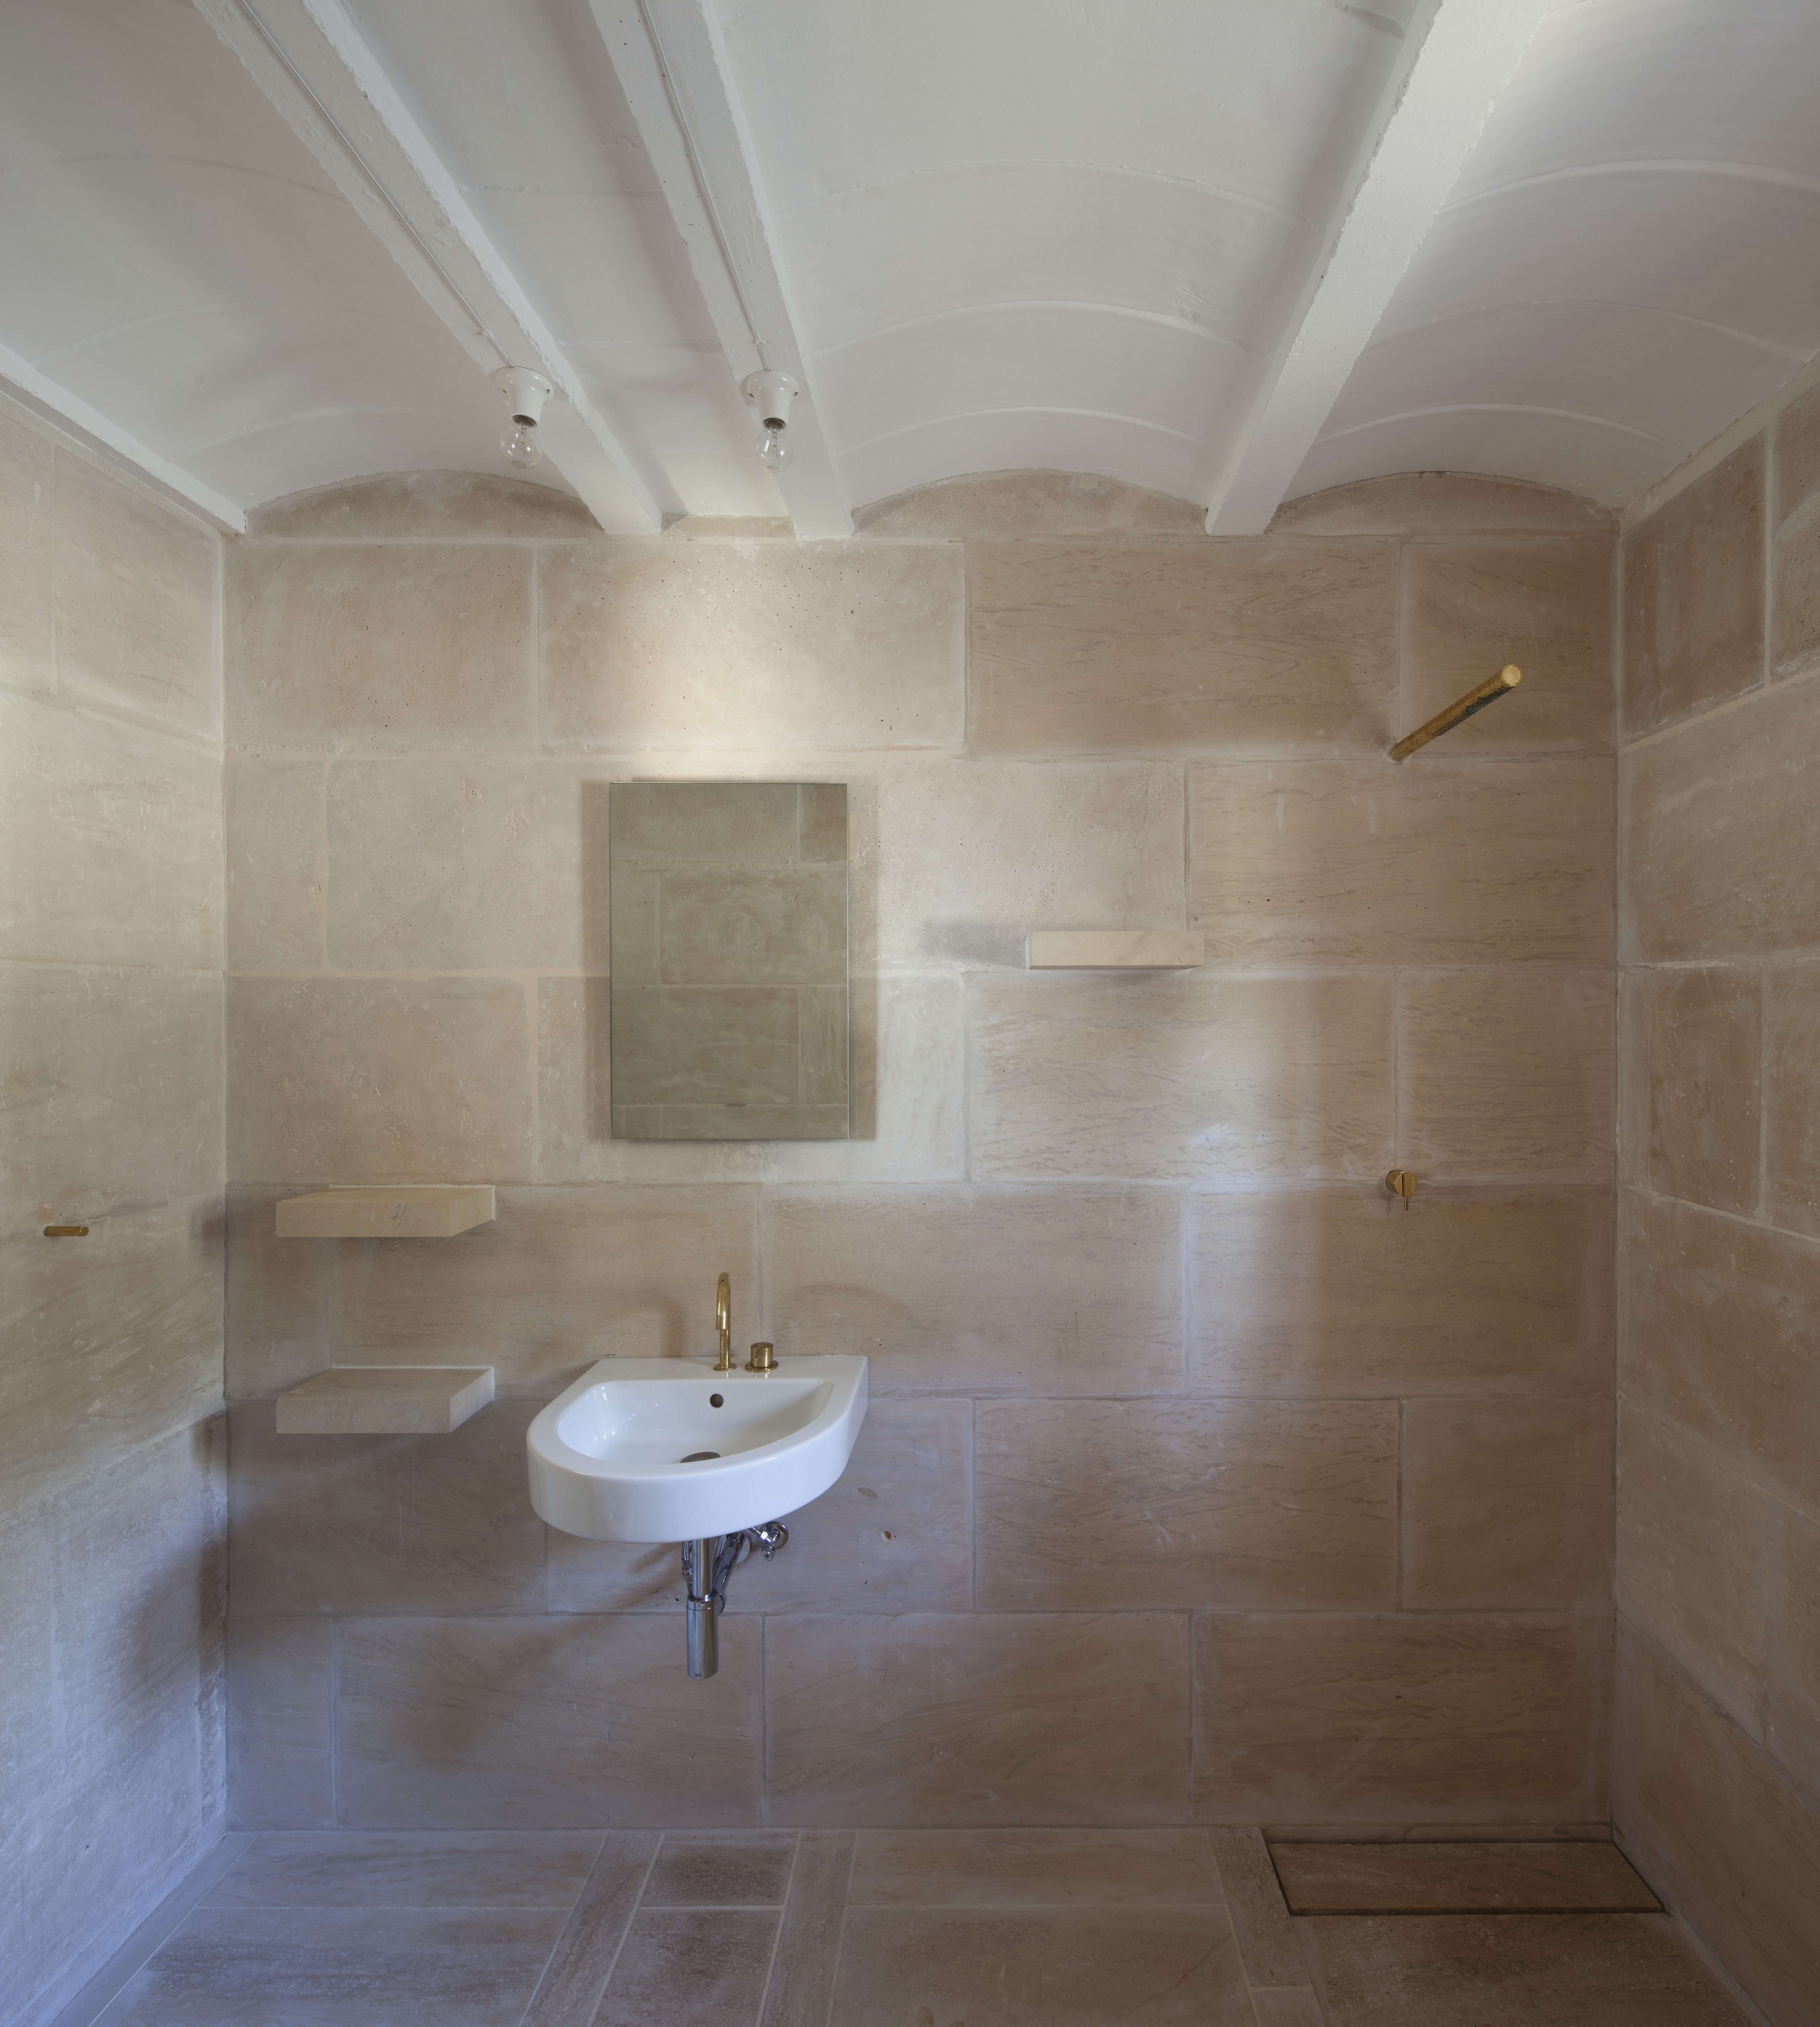 The bare bones bath features almost invisible shower fixtures and integrated stone shelving.